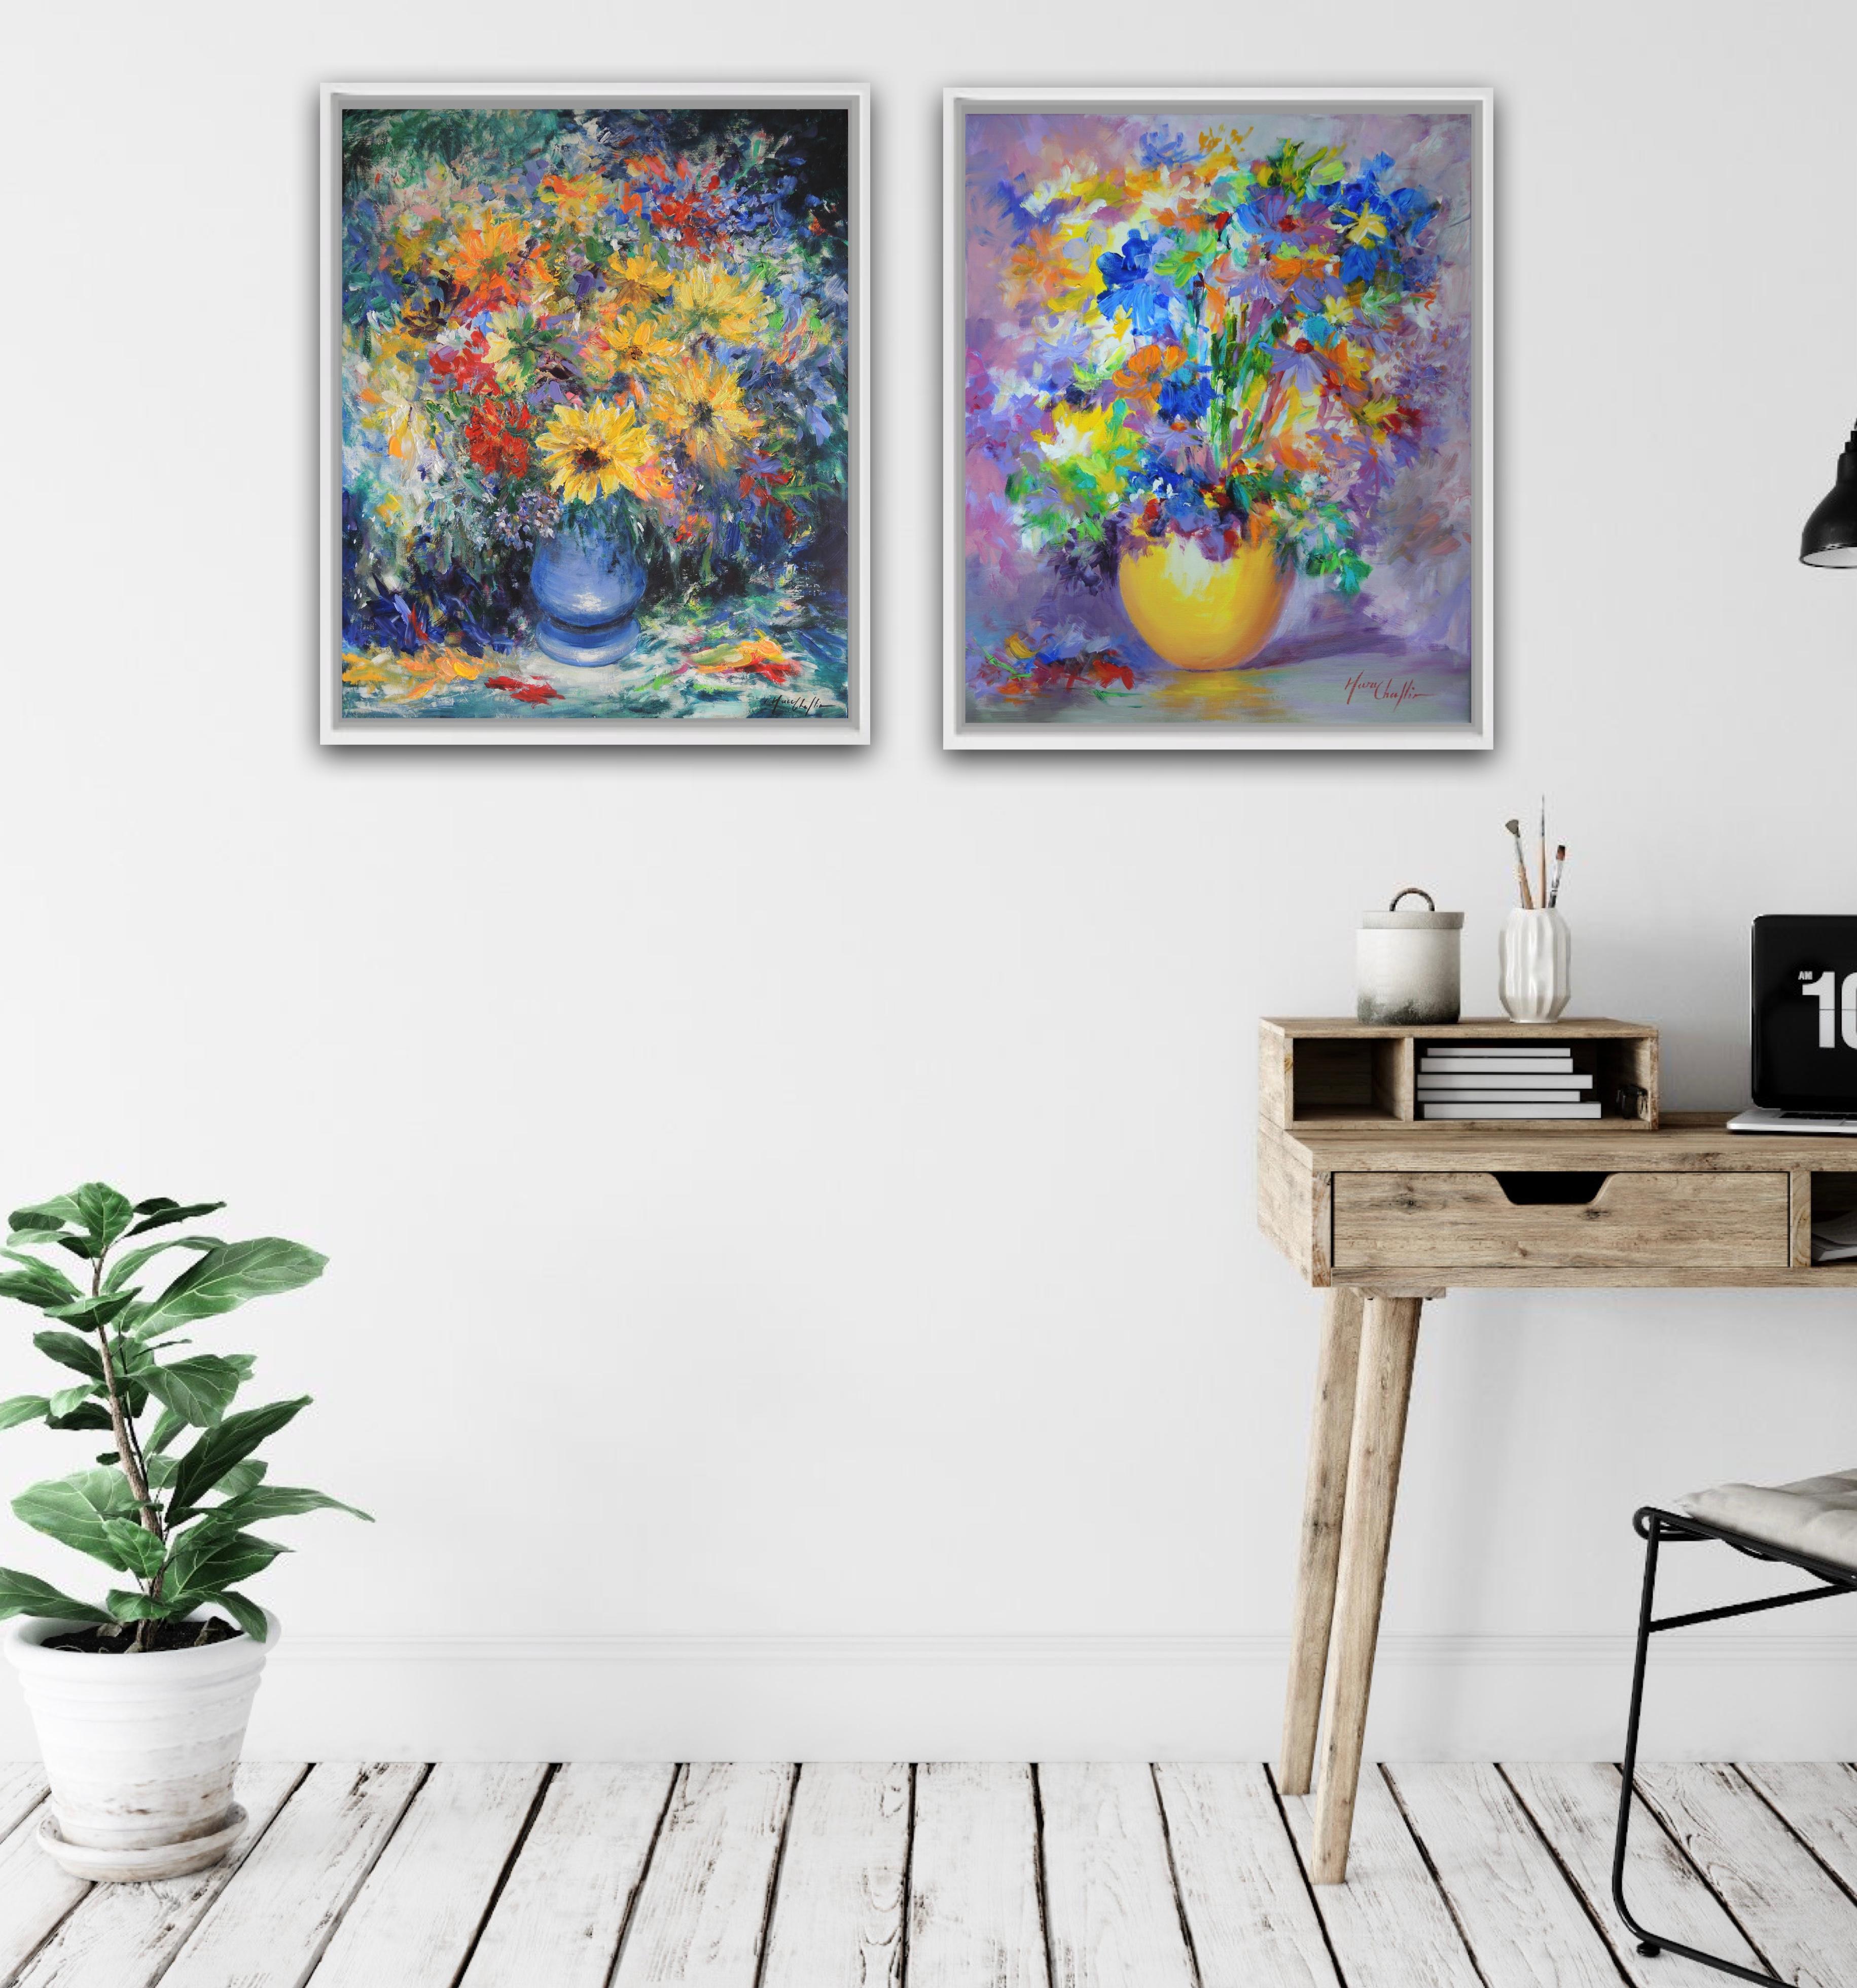 September glory, bouquet in a yellow vase and Autumn glory Diptych - Painting by Mary Chaplin